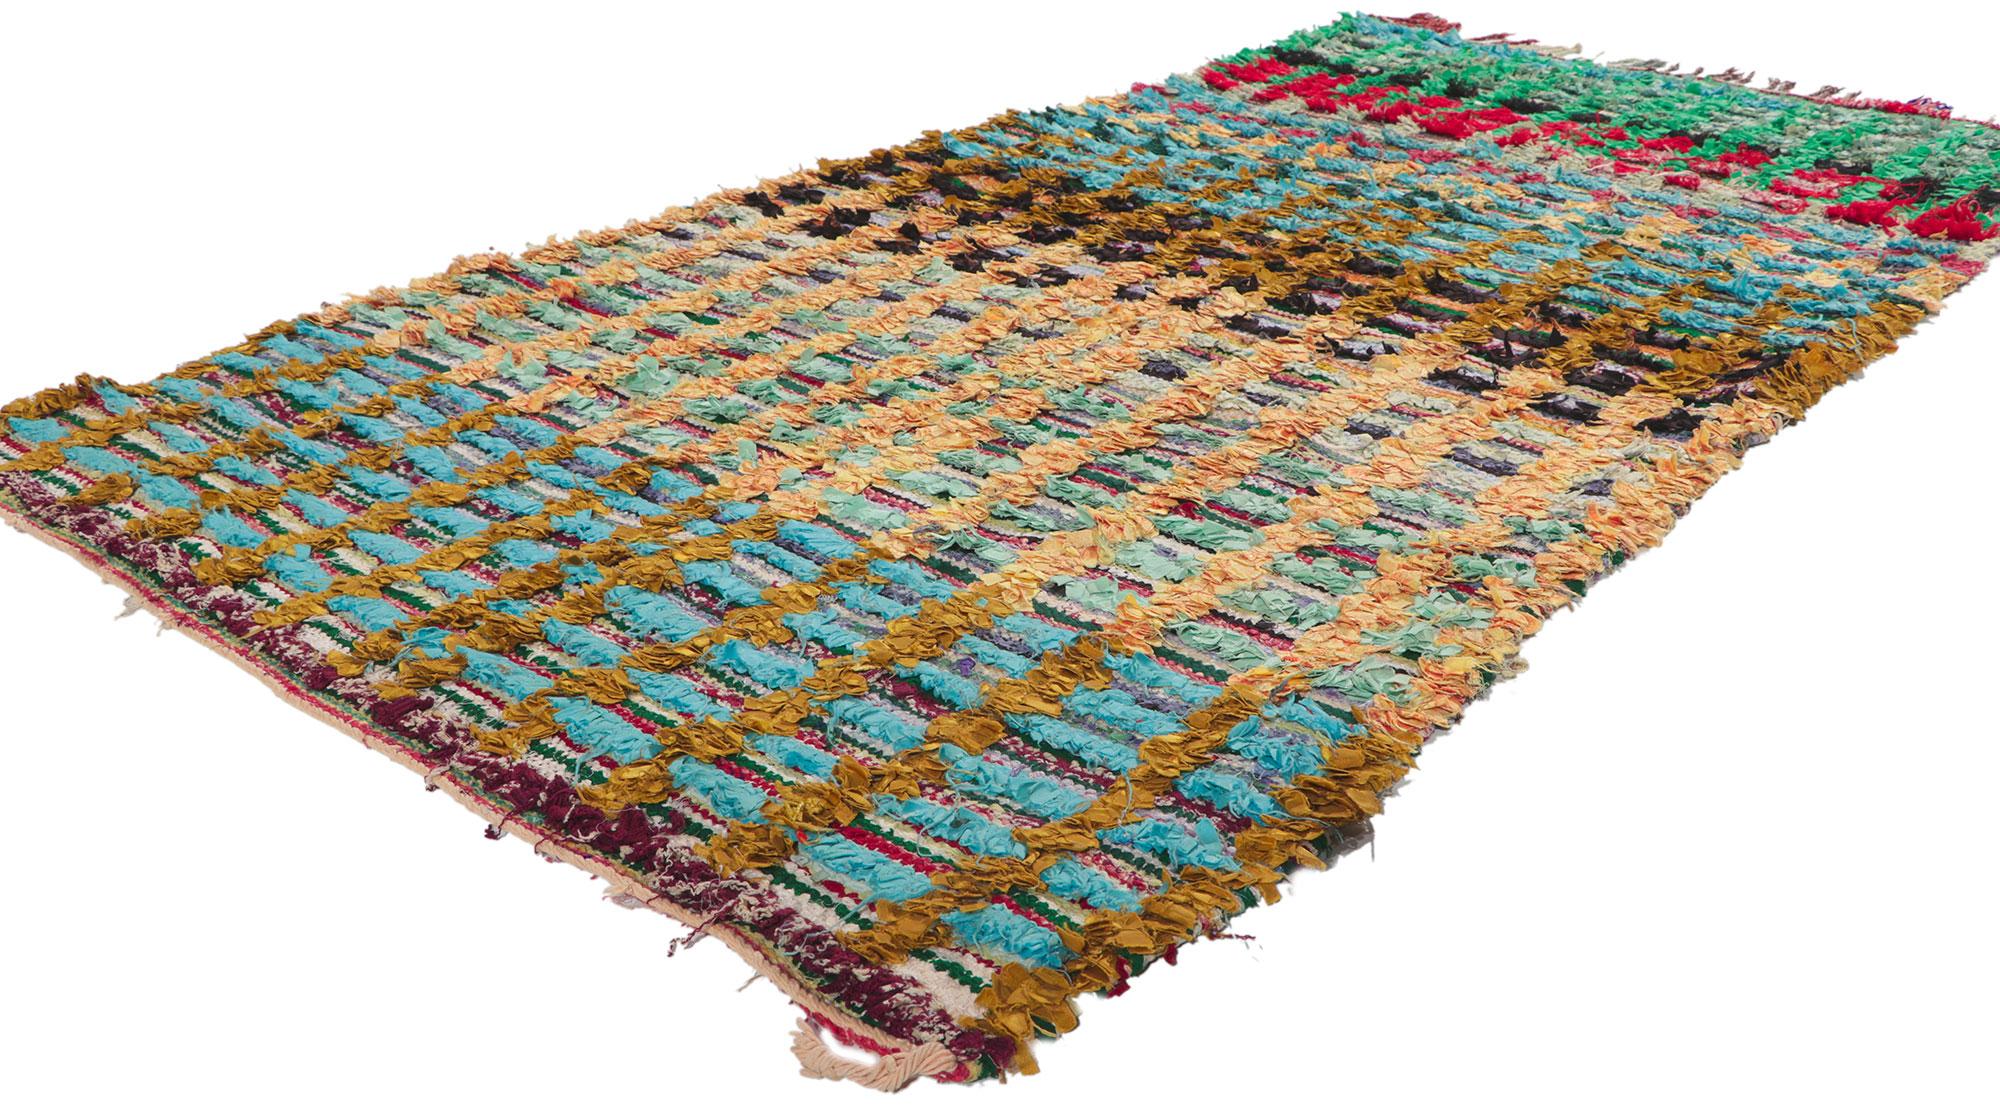 78402 Vintage Moroccan Boucherouite Rag rug 03'05 x 07'02. ?With its nomadic charm, incredible detail and texture, this hand knotted vintage Moroccan rag rug is a captivating vision of woven beauty. The geometric design and lively colorway woven